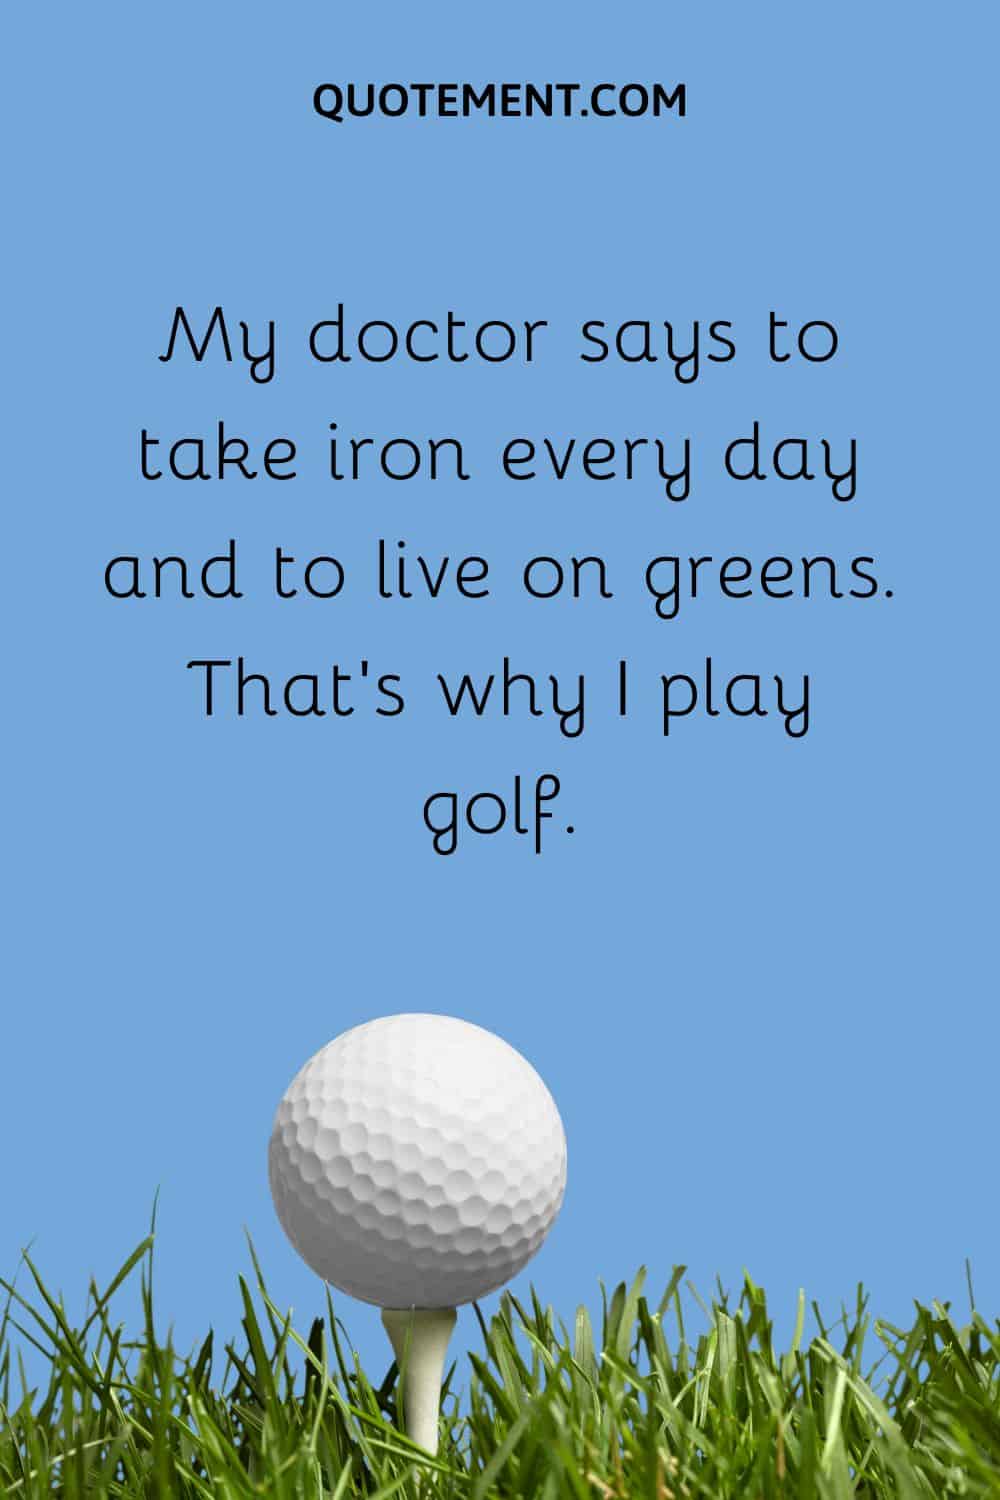 That’s why I play golf.